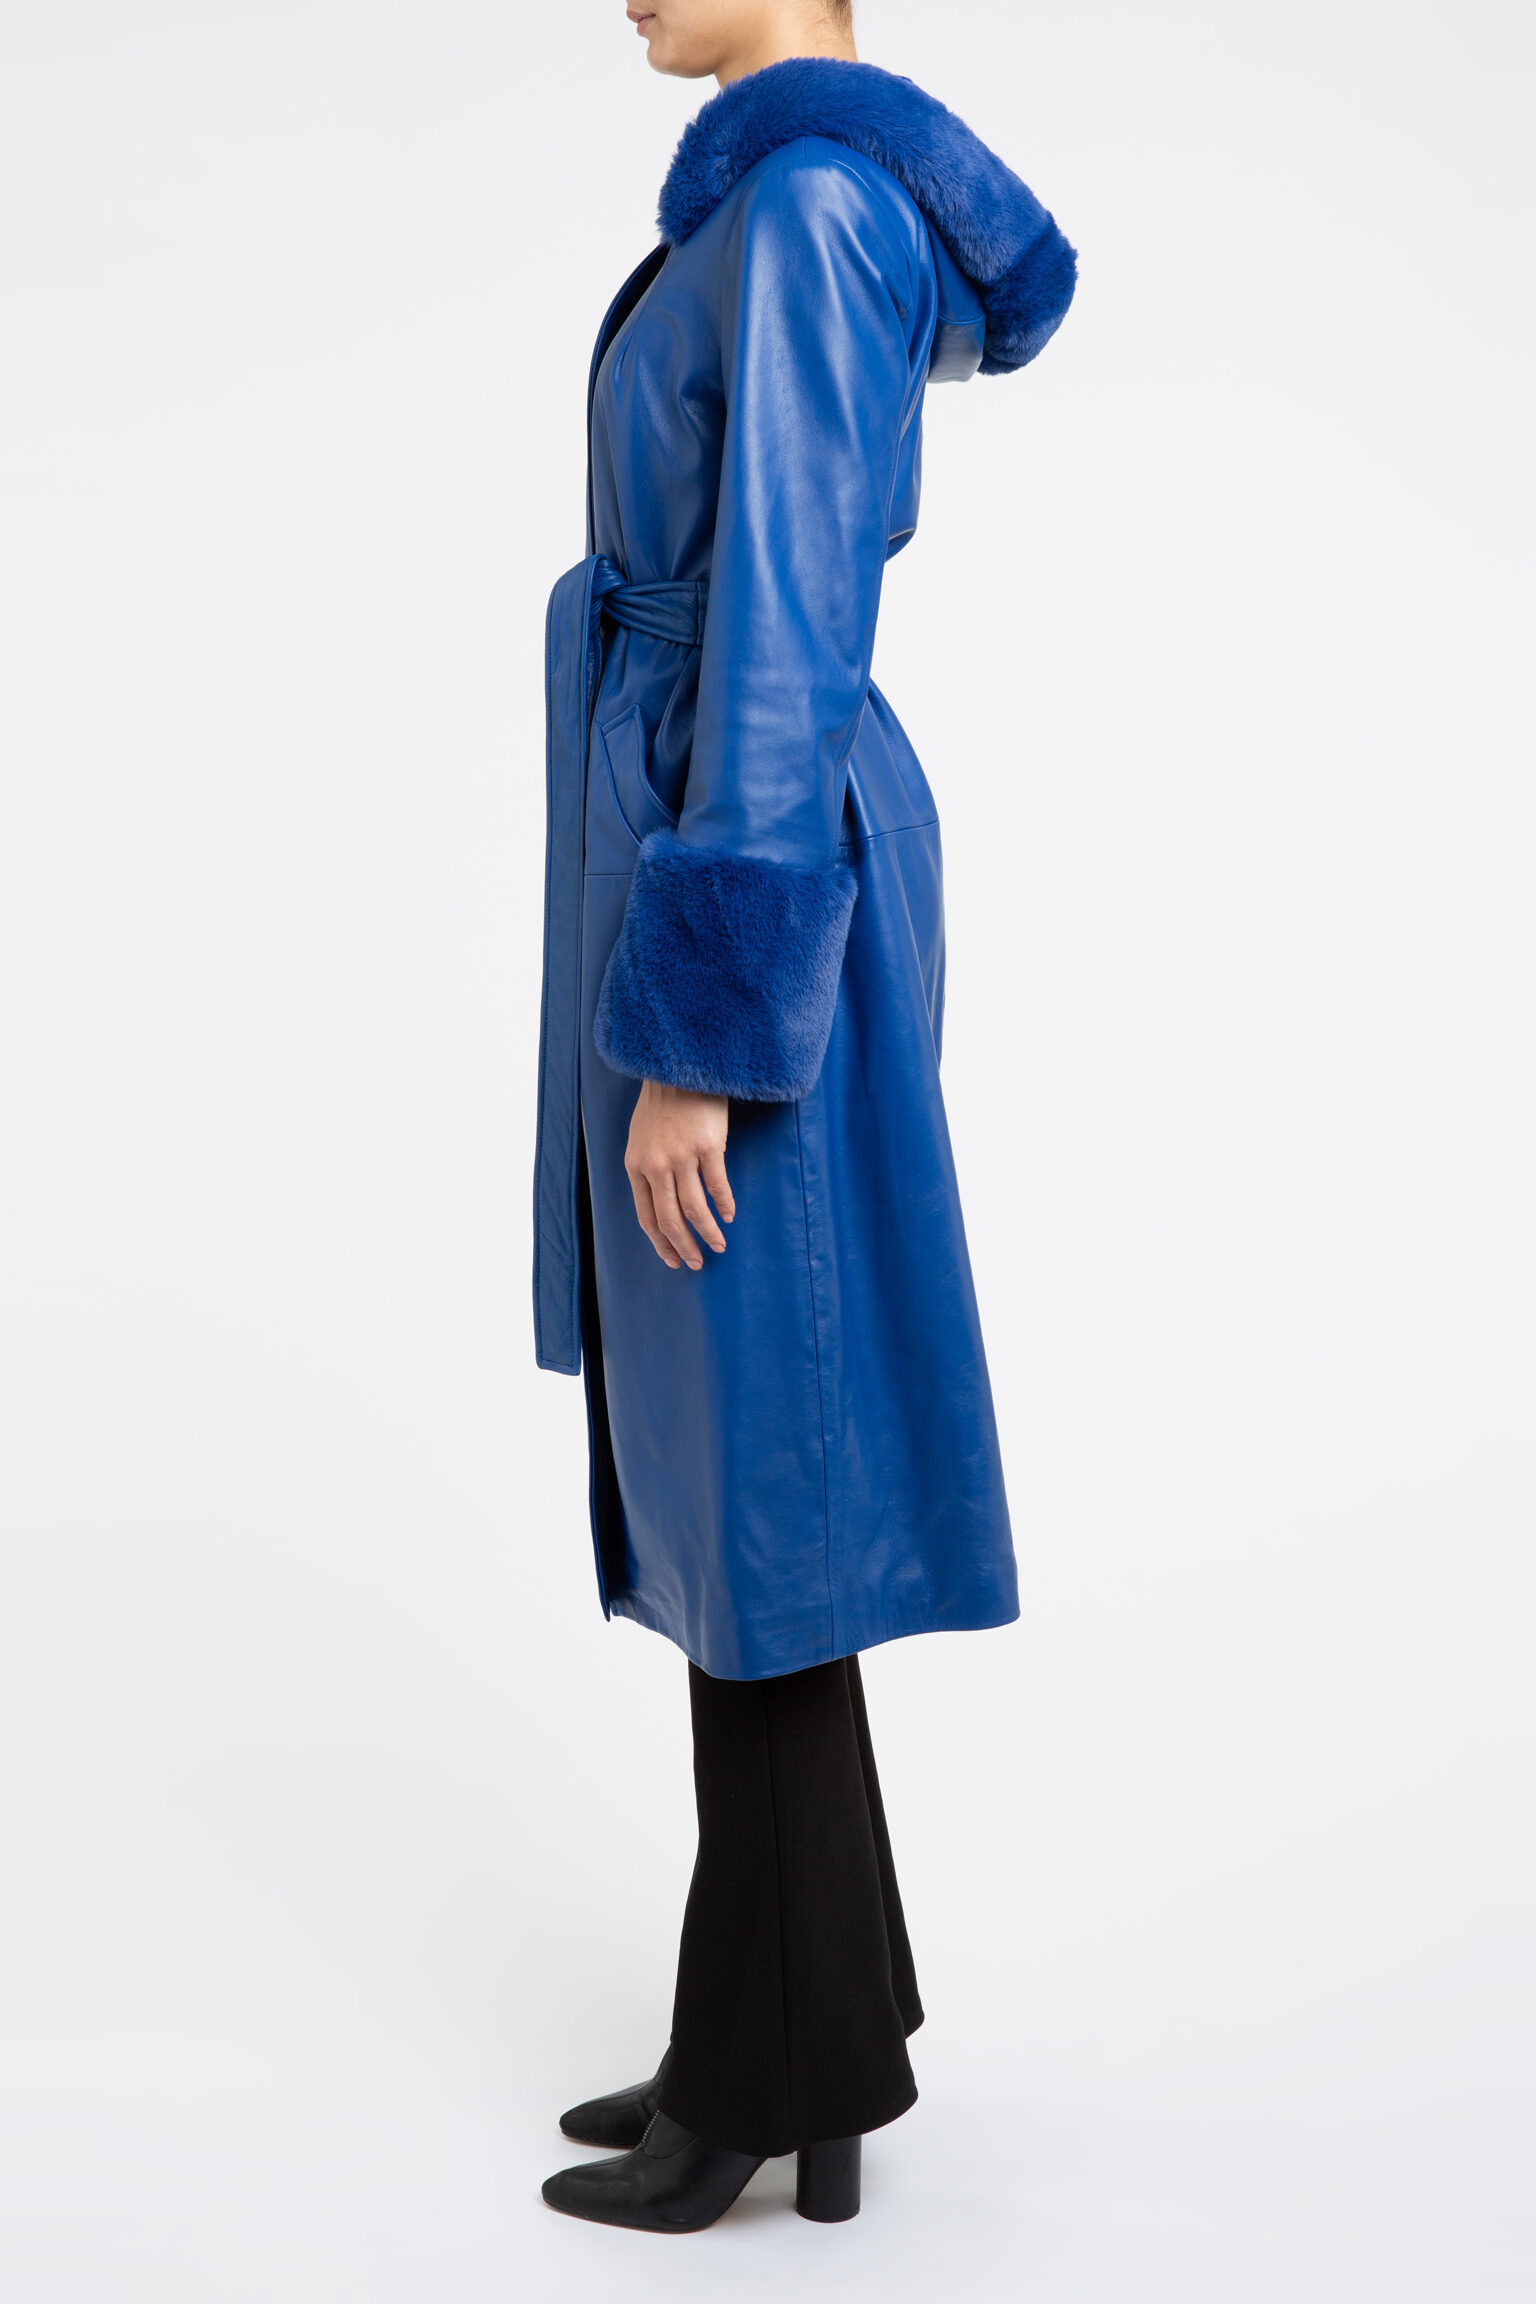 Aurora Leather Trench Coat in Blue